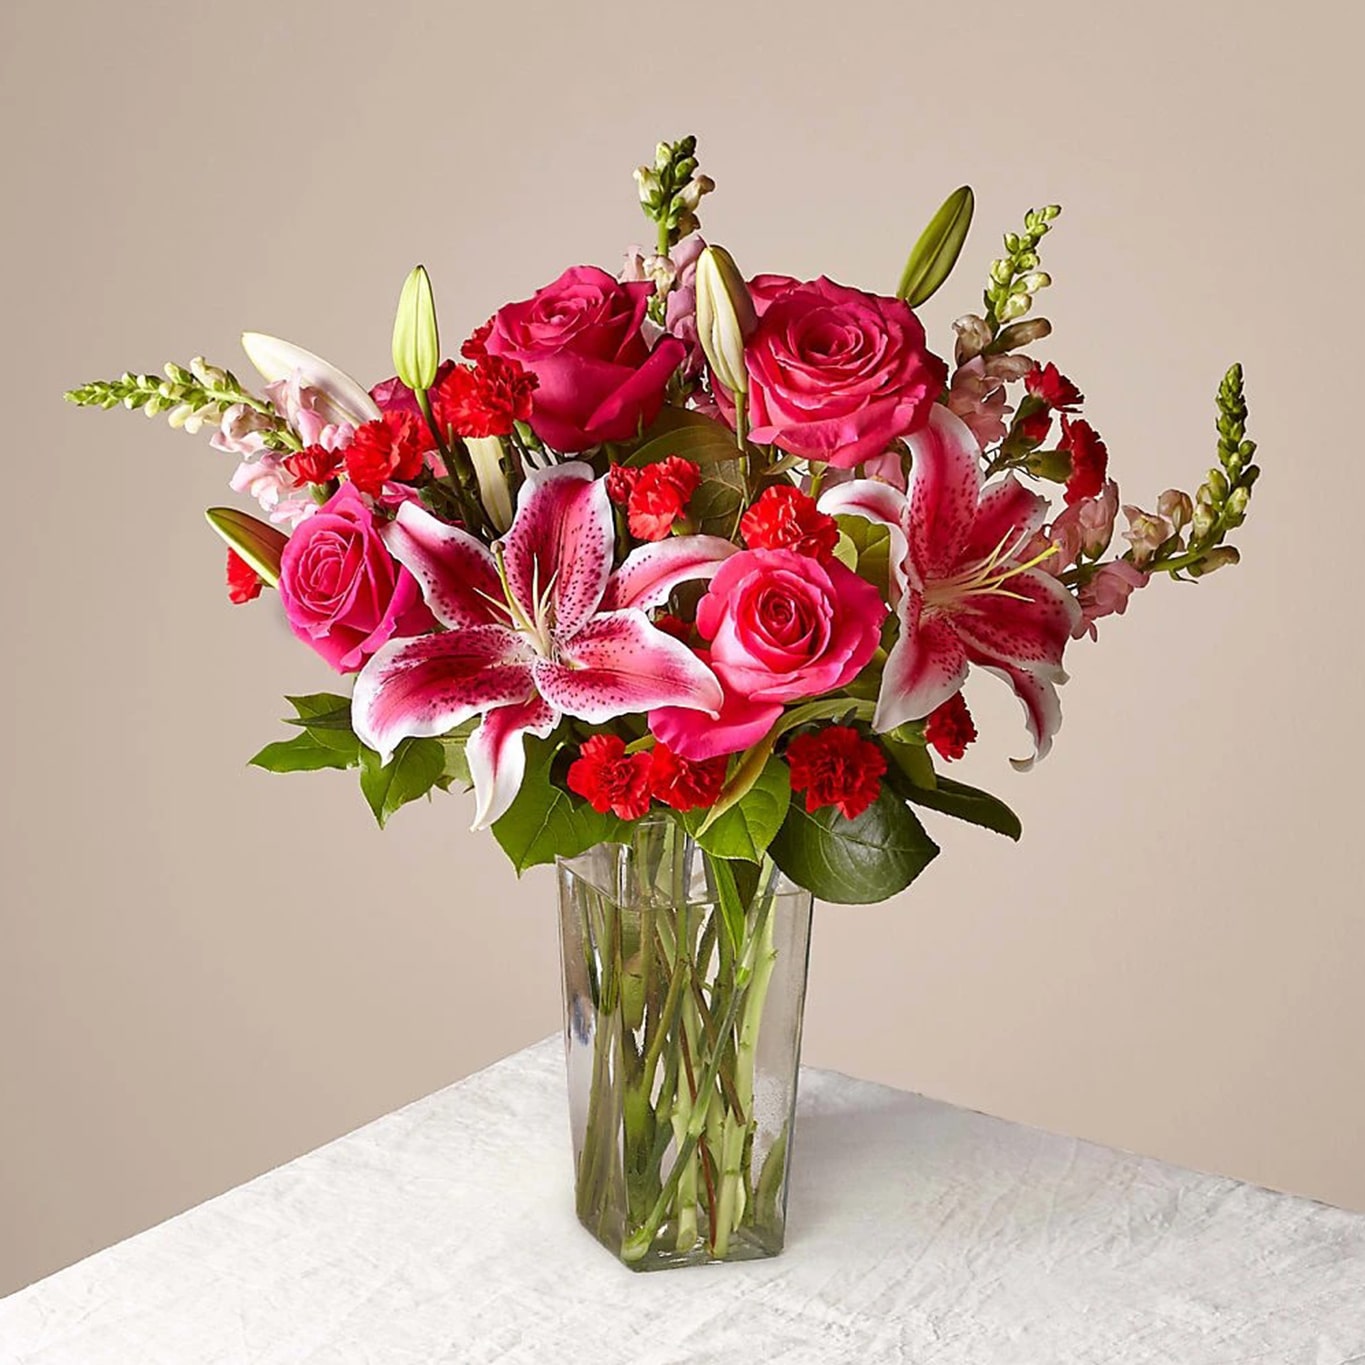 Roses Special Valentine, It is a beautiful anniversary gift, birthday flower gift, all occasion flower, and decoration, Fresh Flowers Orlando.